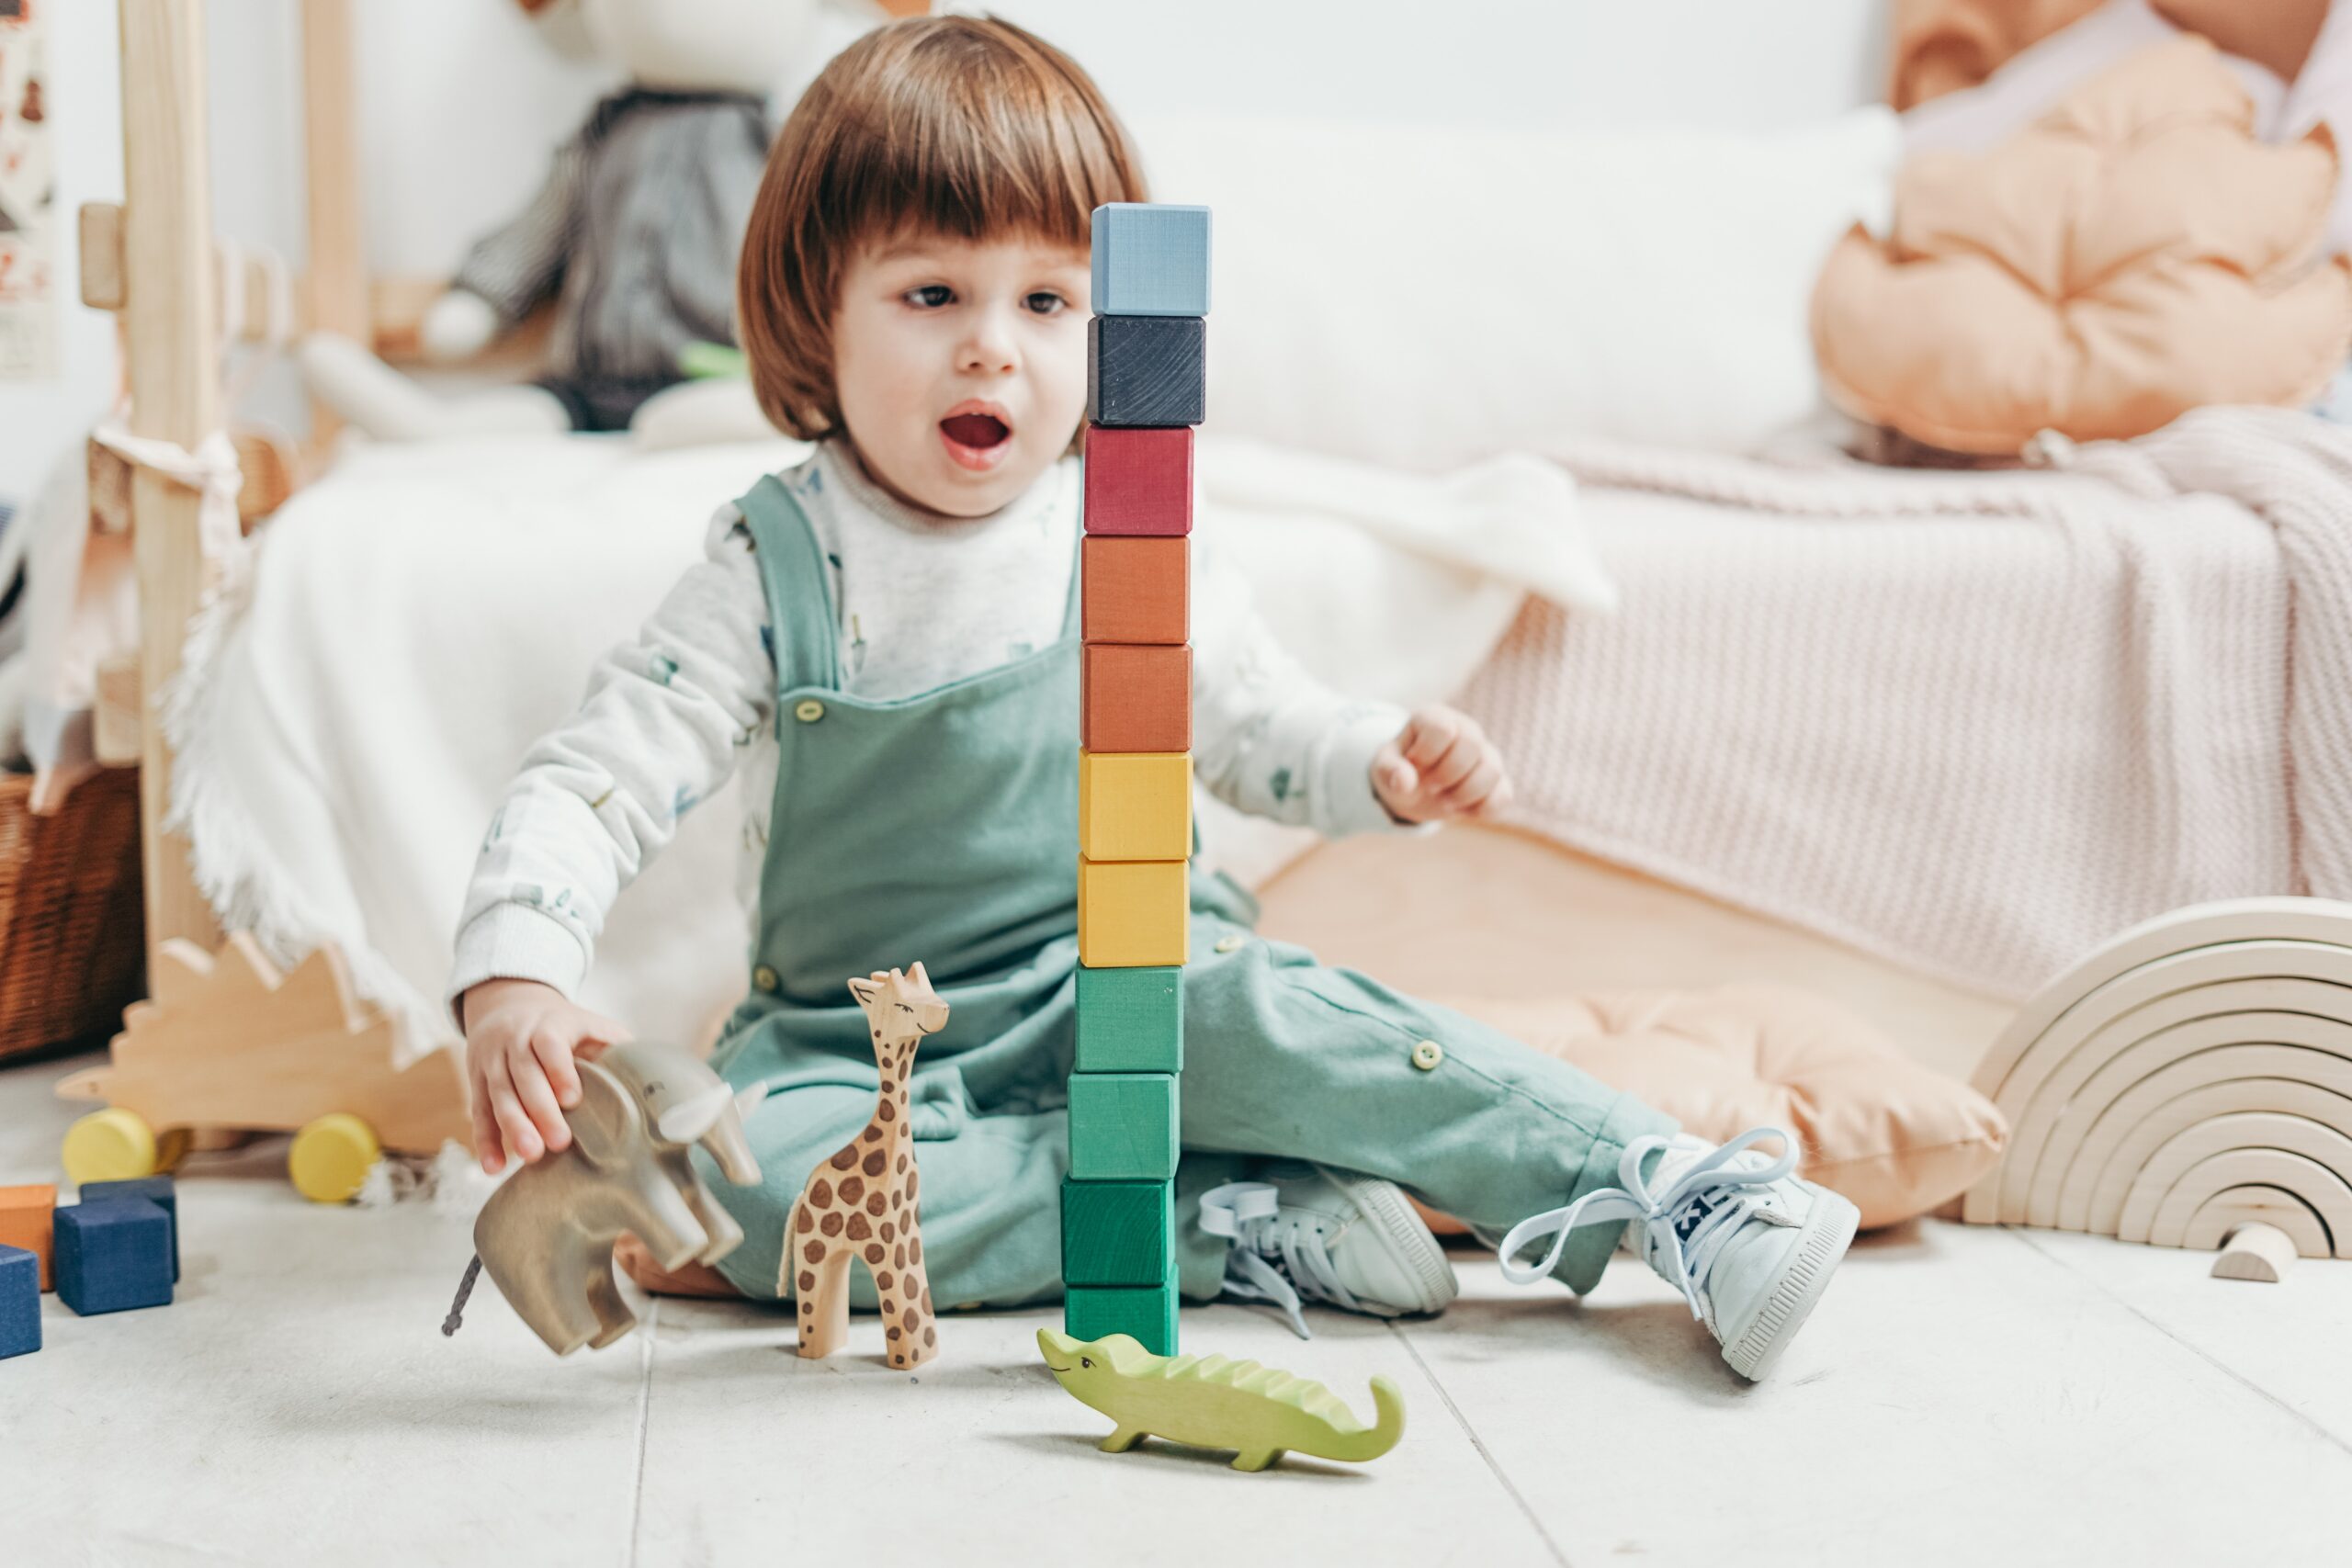 Importance of Toys in Childhood Development